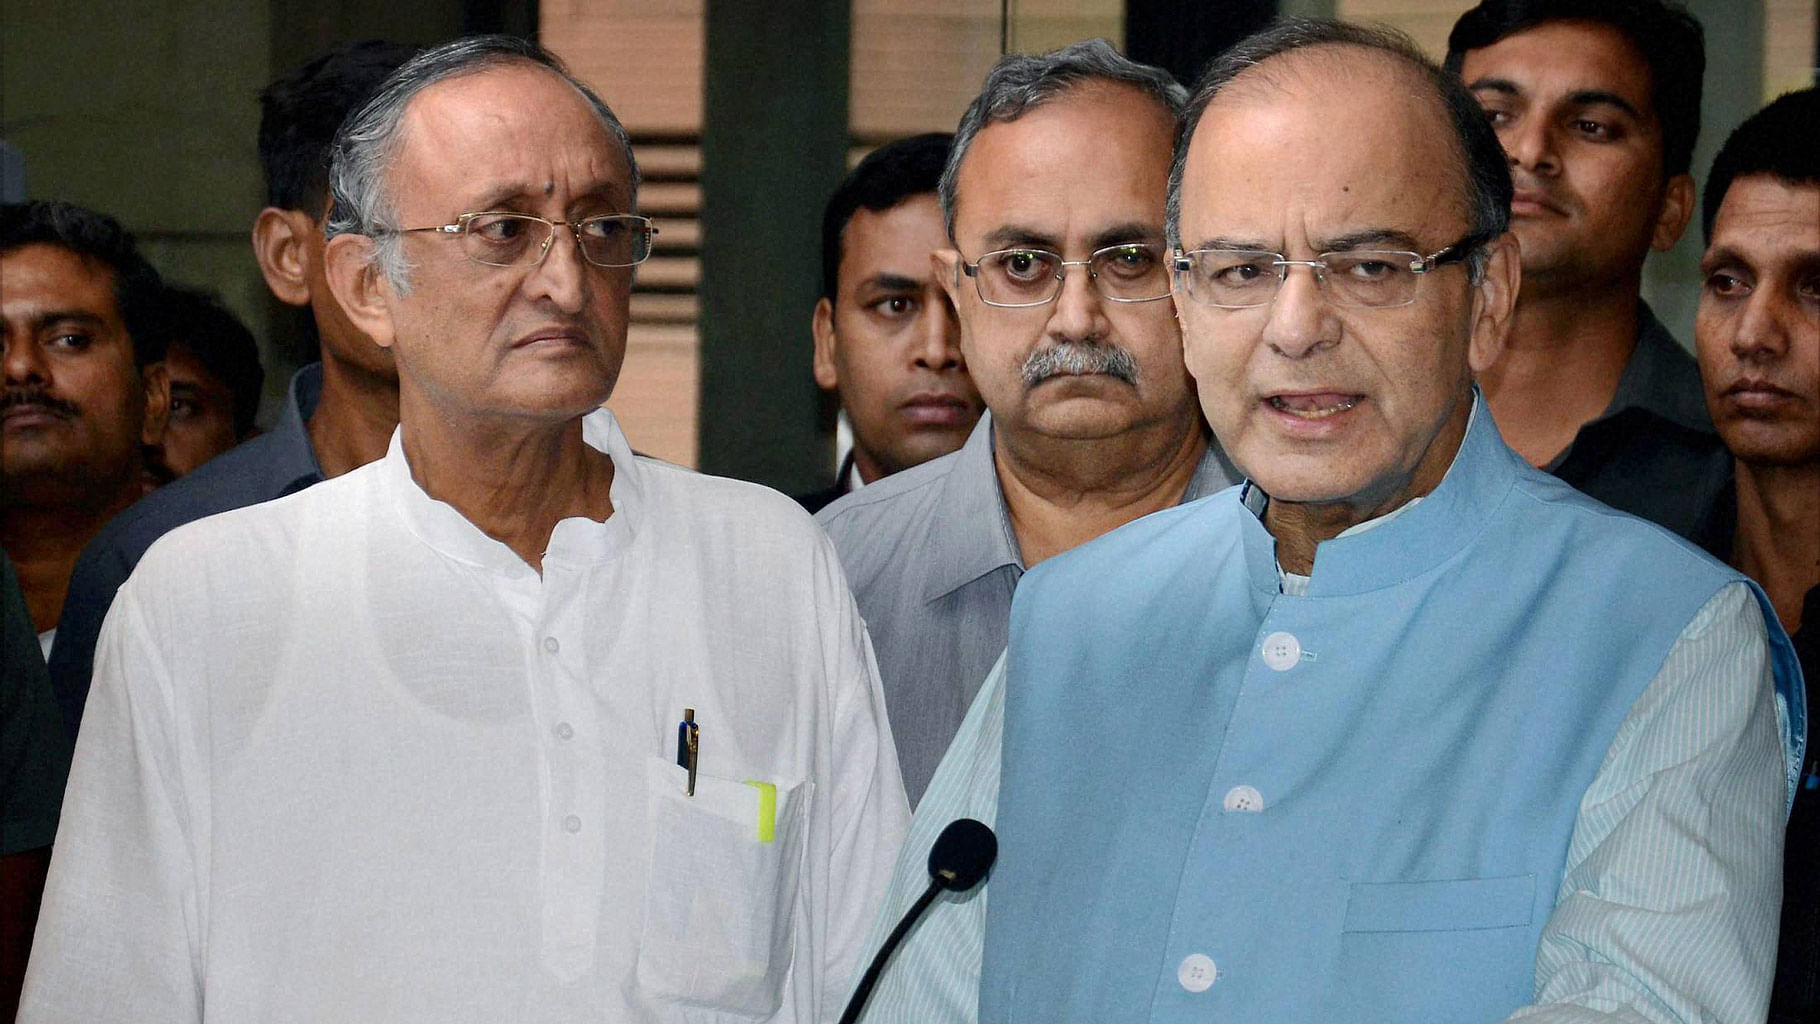 

Union Finance Minister Arun Jaitley briefing the media during inauguration of GST meeting  in Kolkata in 2016. (Photo: PTI)